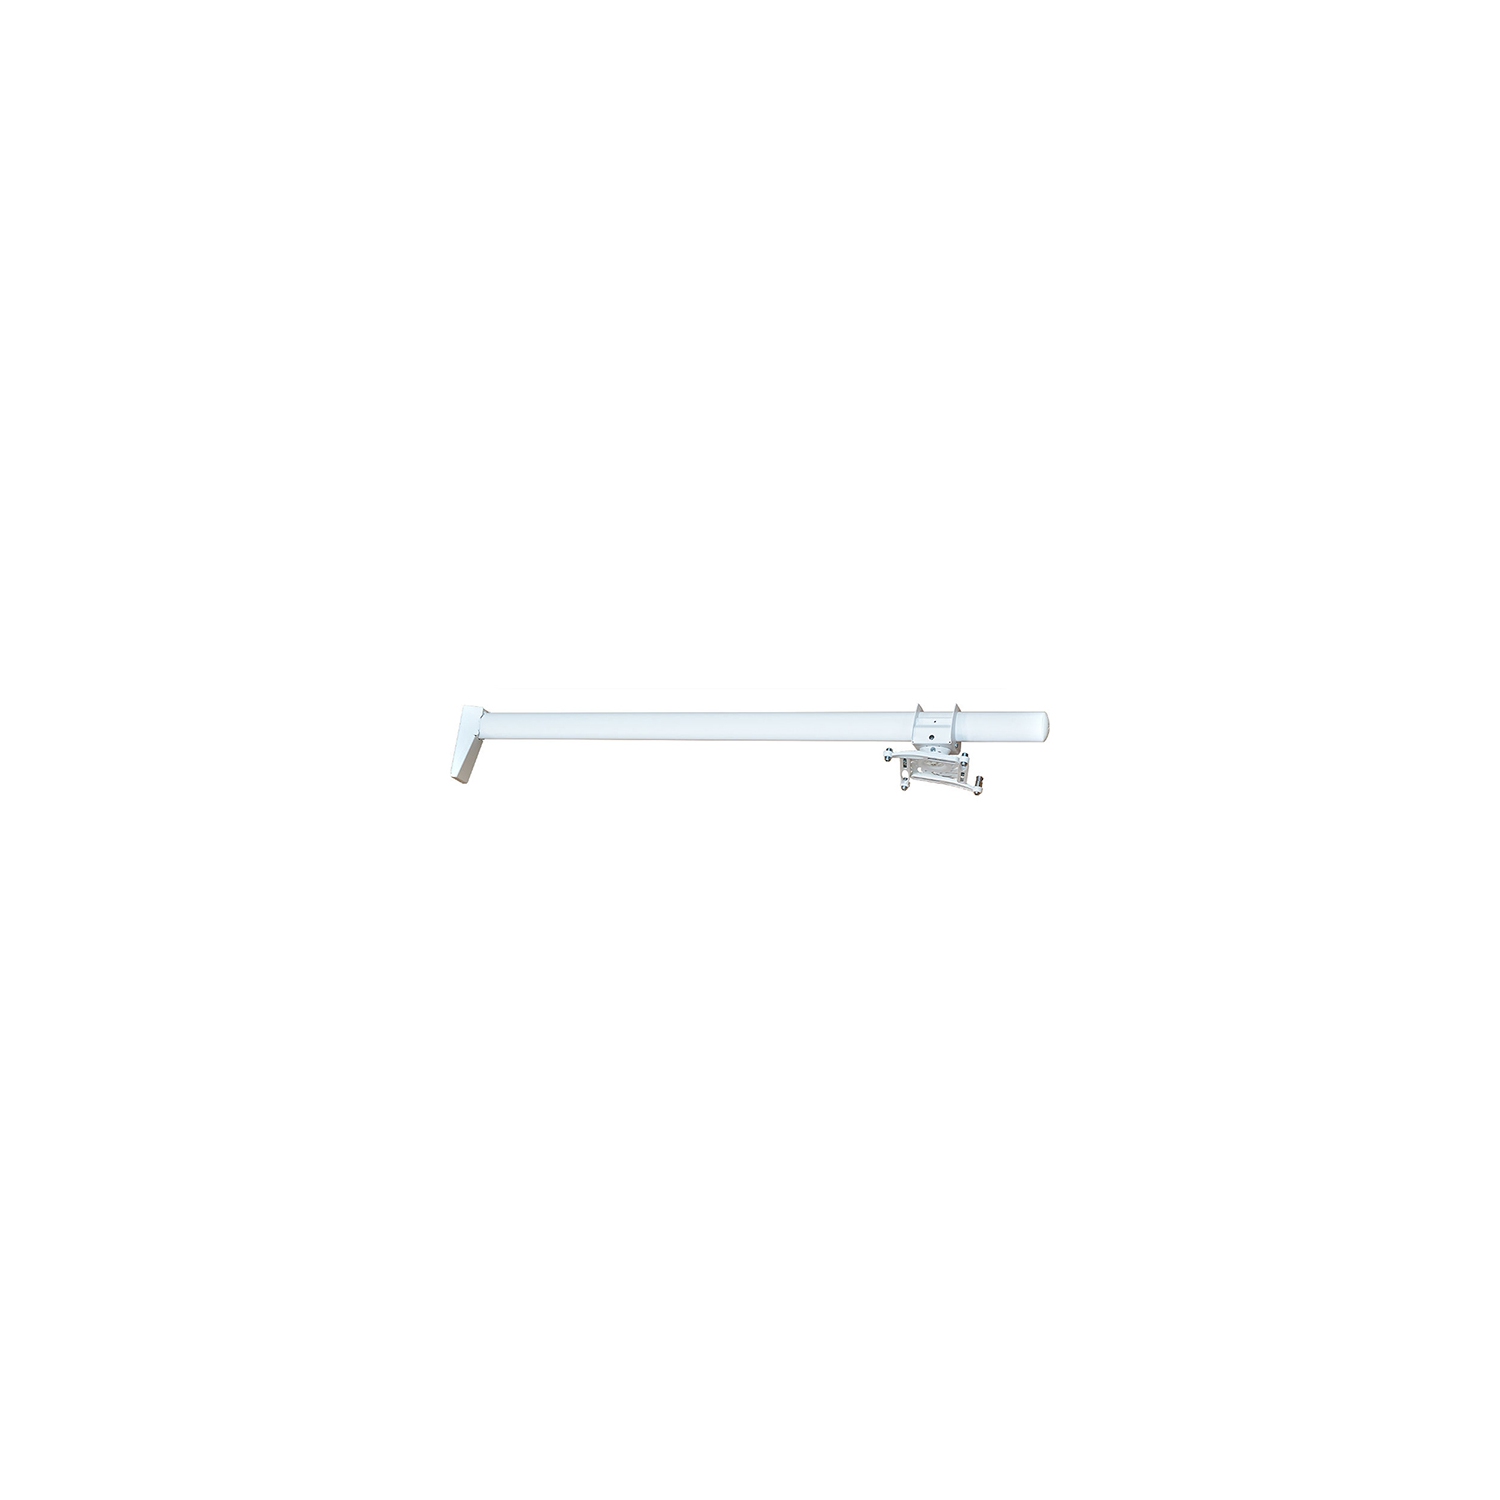 Viewsonic Short Throw 49" Wall Mount Kit for Projector - White (WMK-042)